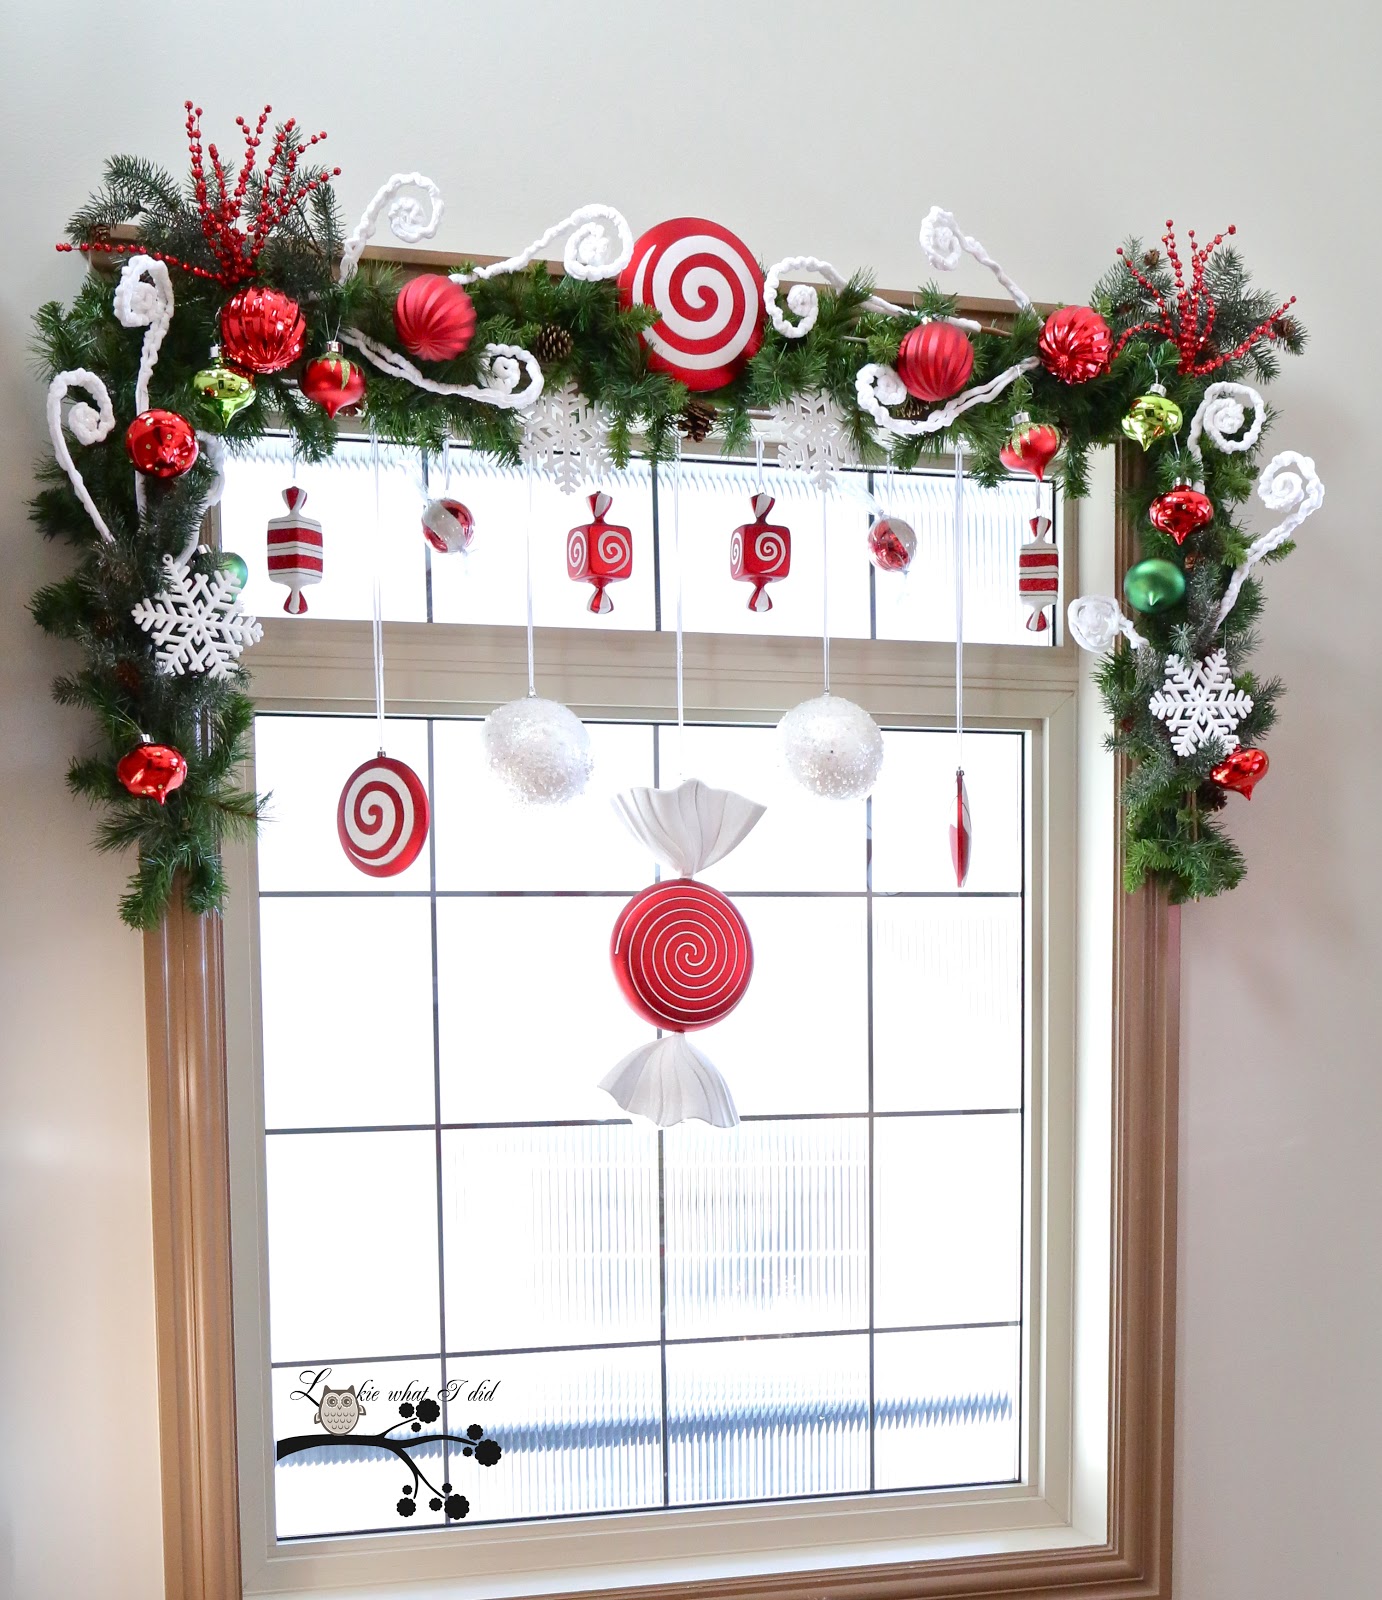 Faux candies in red-white tones would become a great addition to an evergreen swag topping the window.